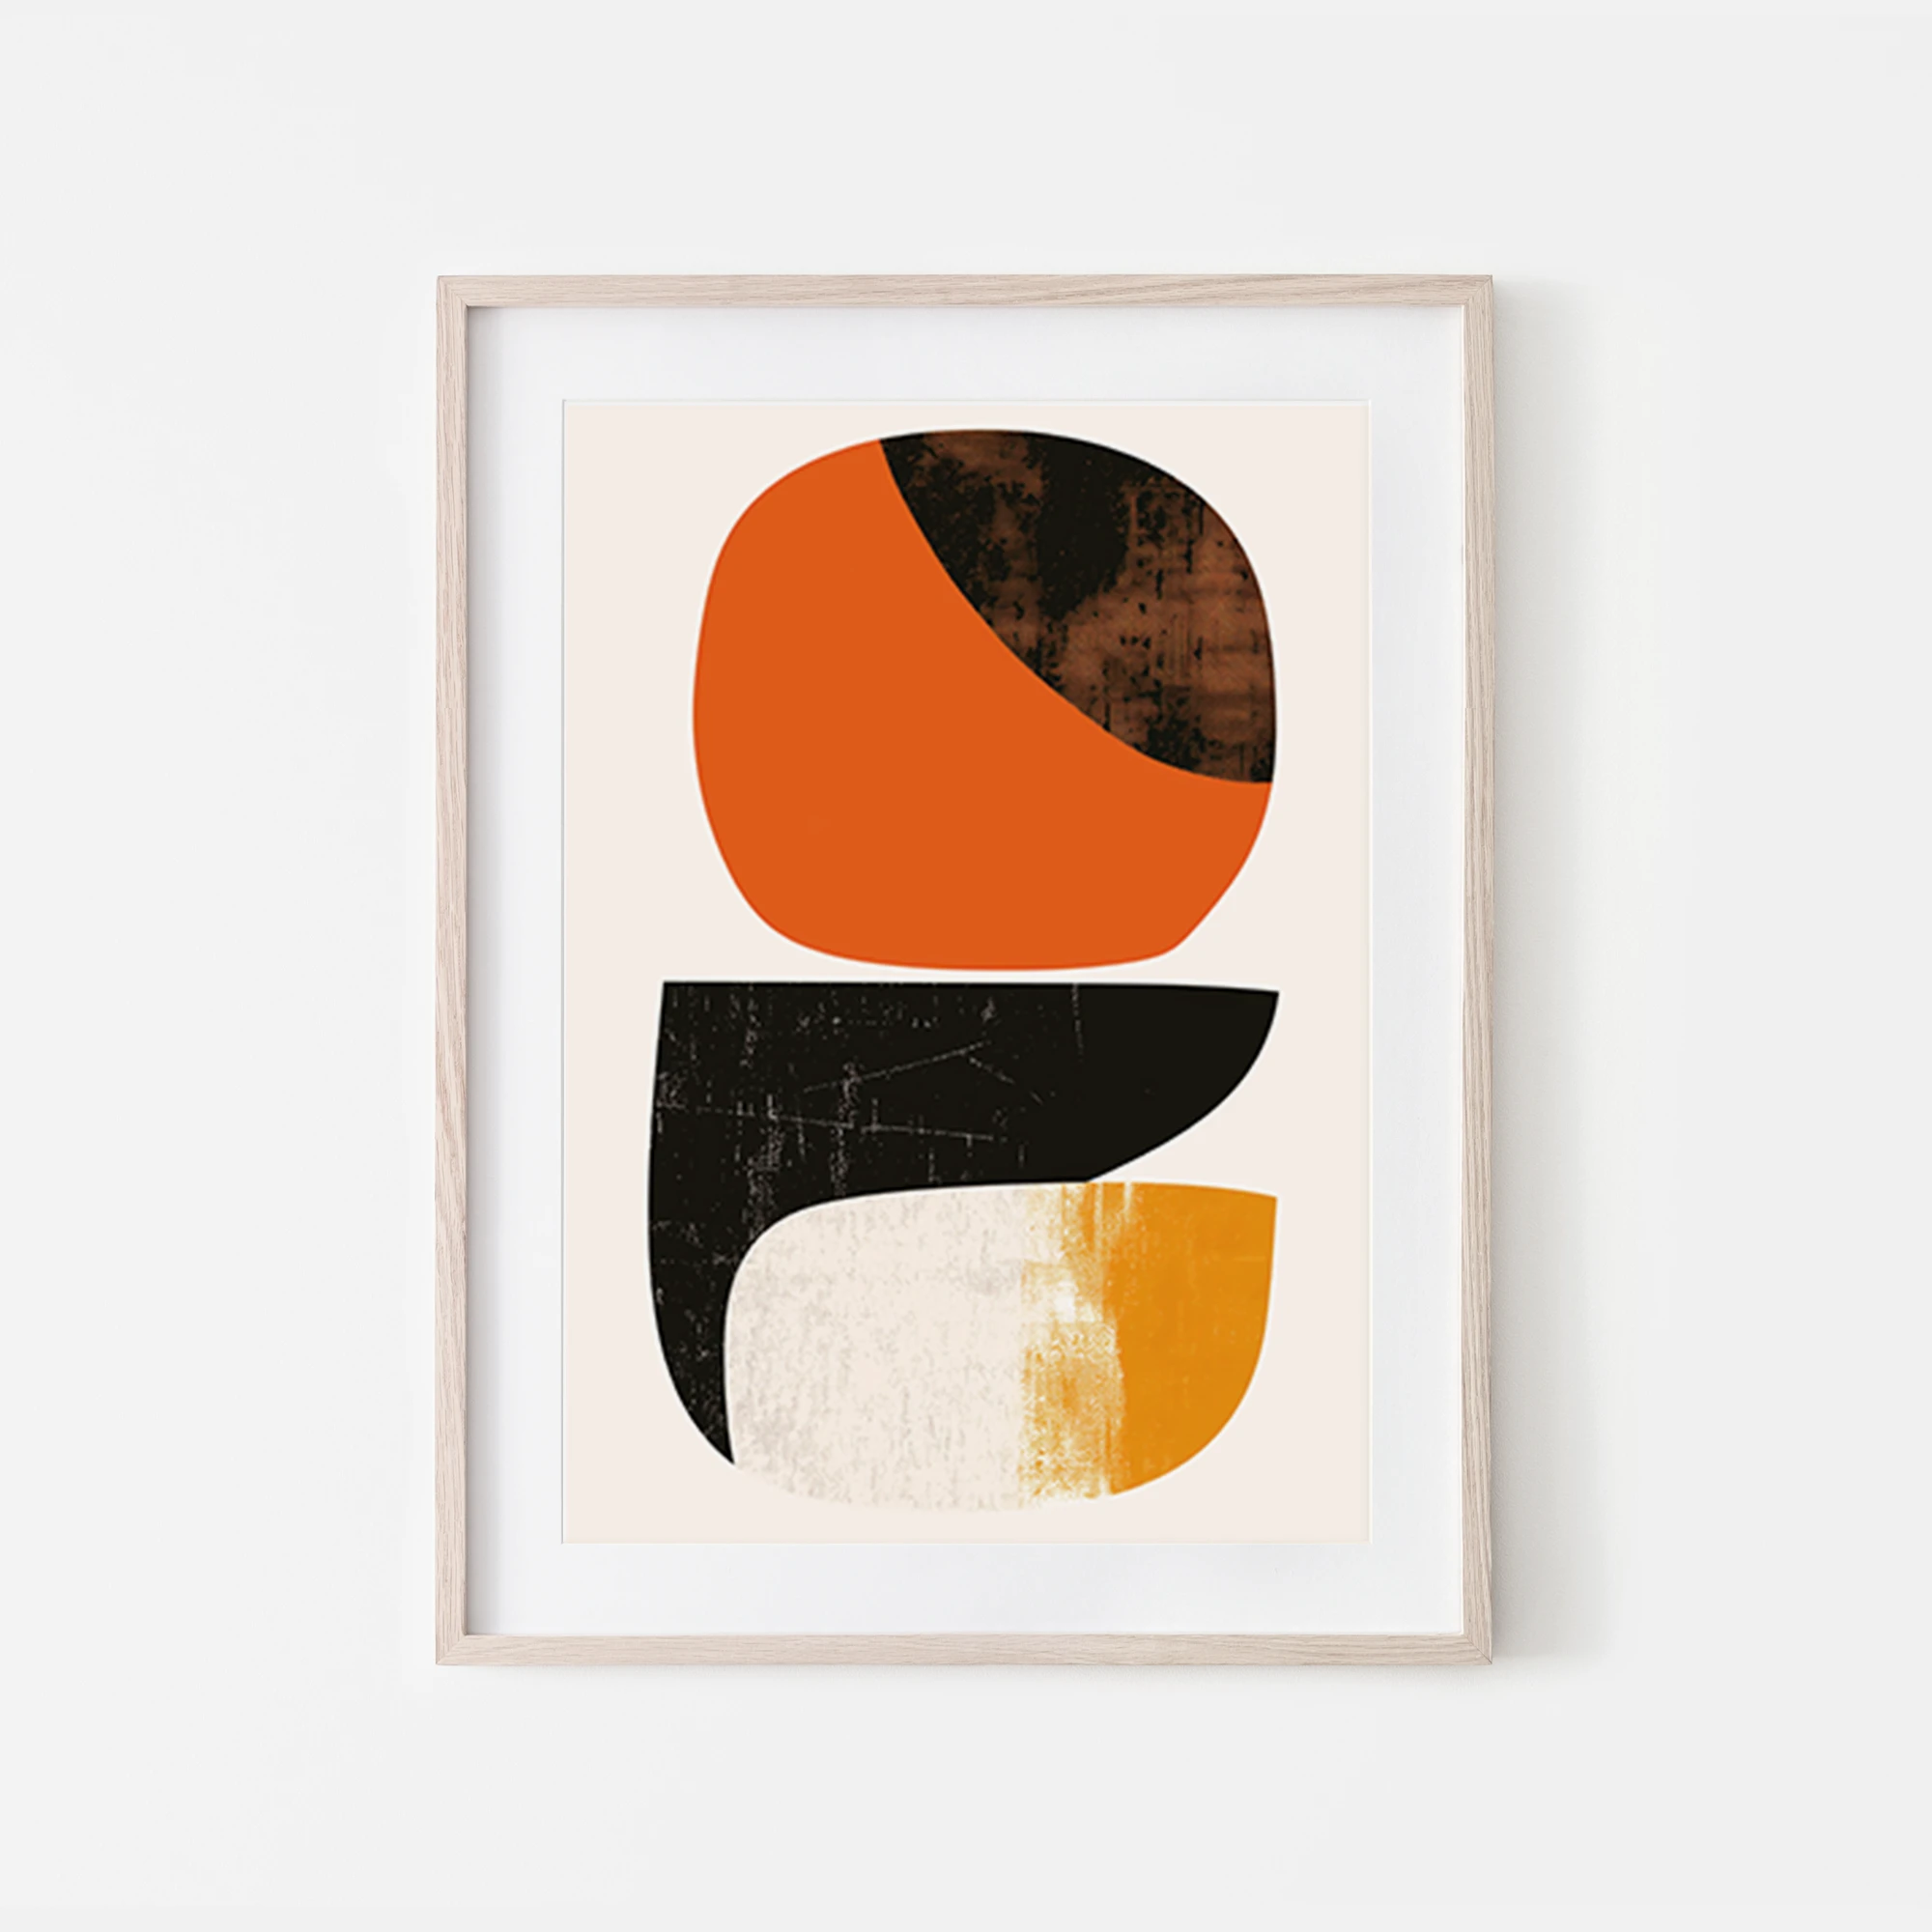 Minimalist art print with abstract bold shapes in shades of orange and contrasting black